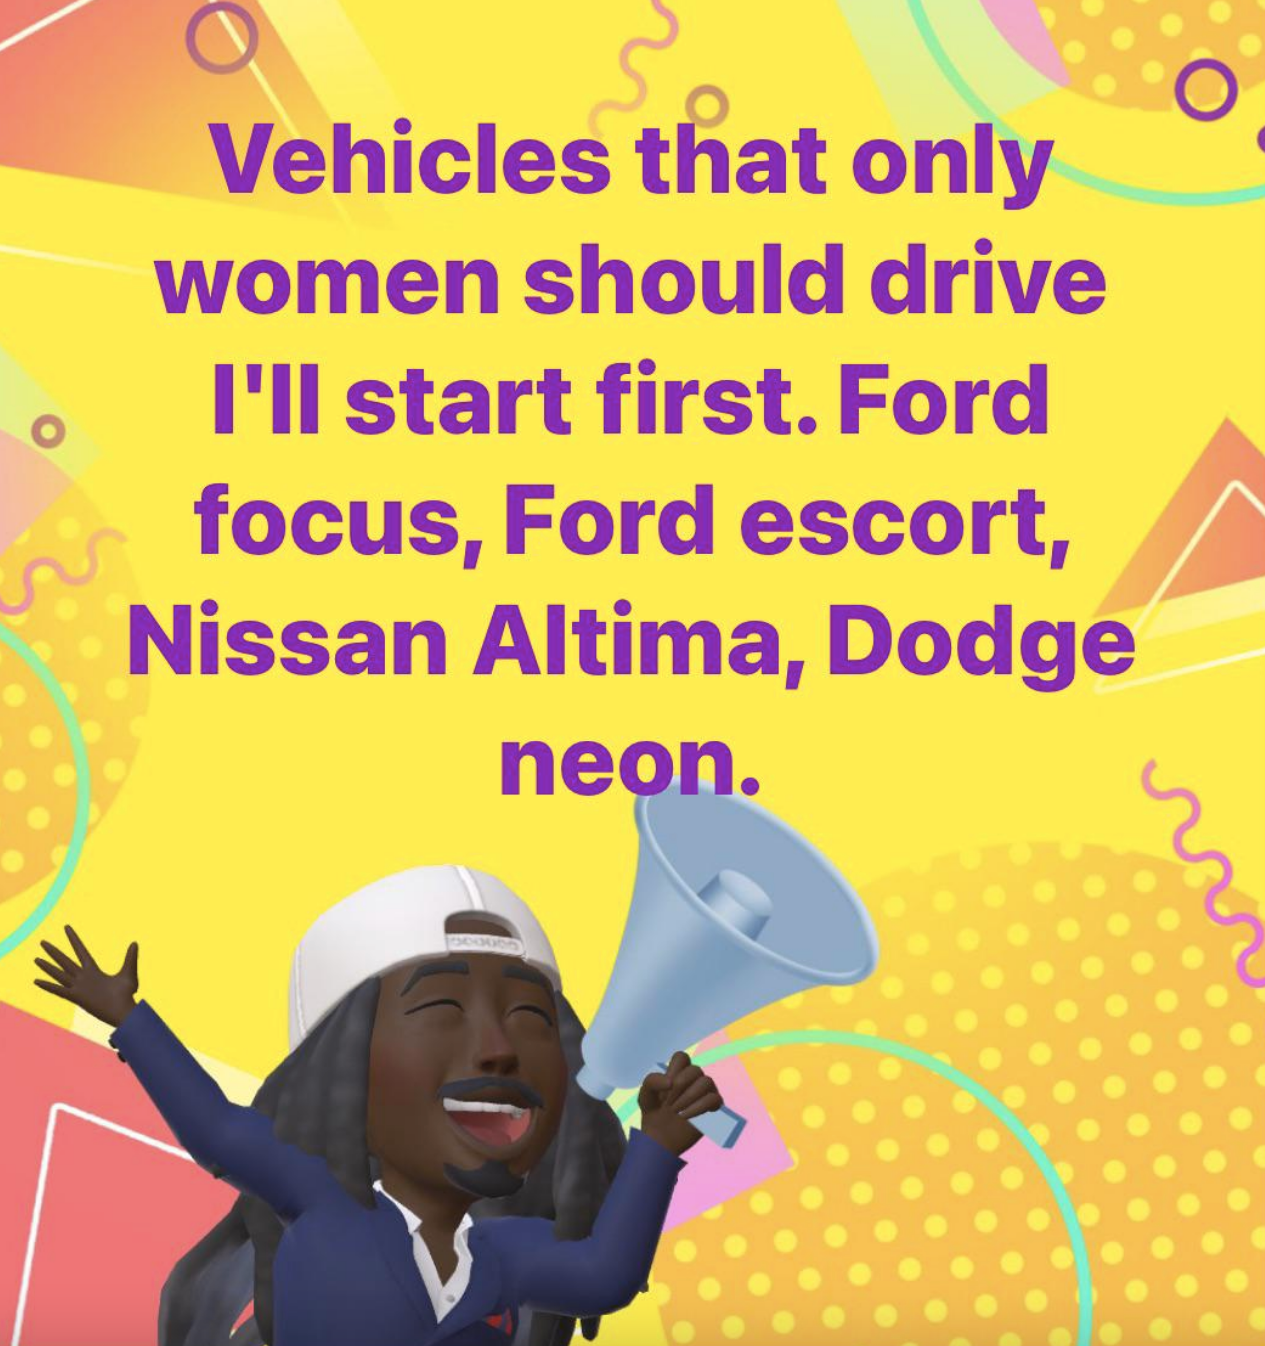 Post saying which cars are appropriate for women.